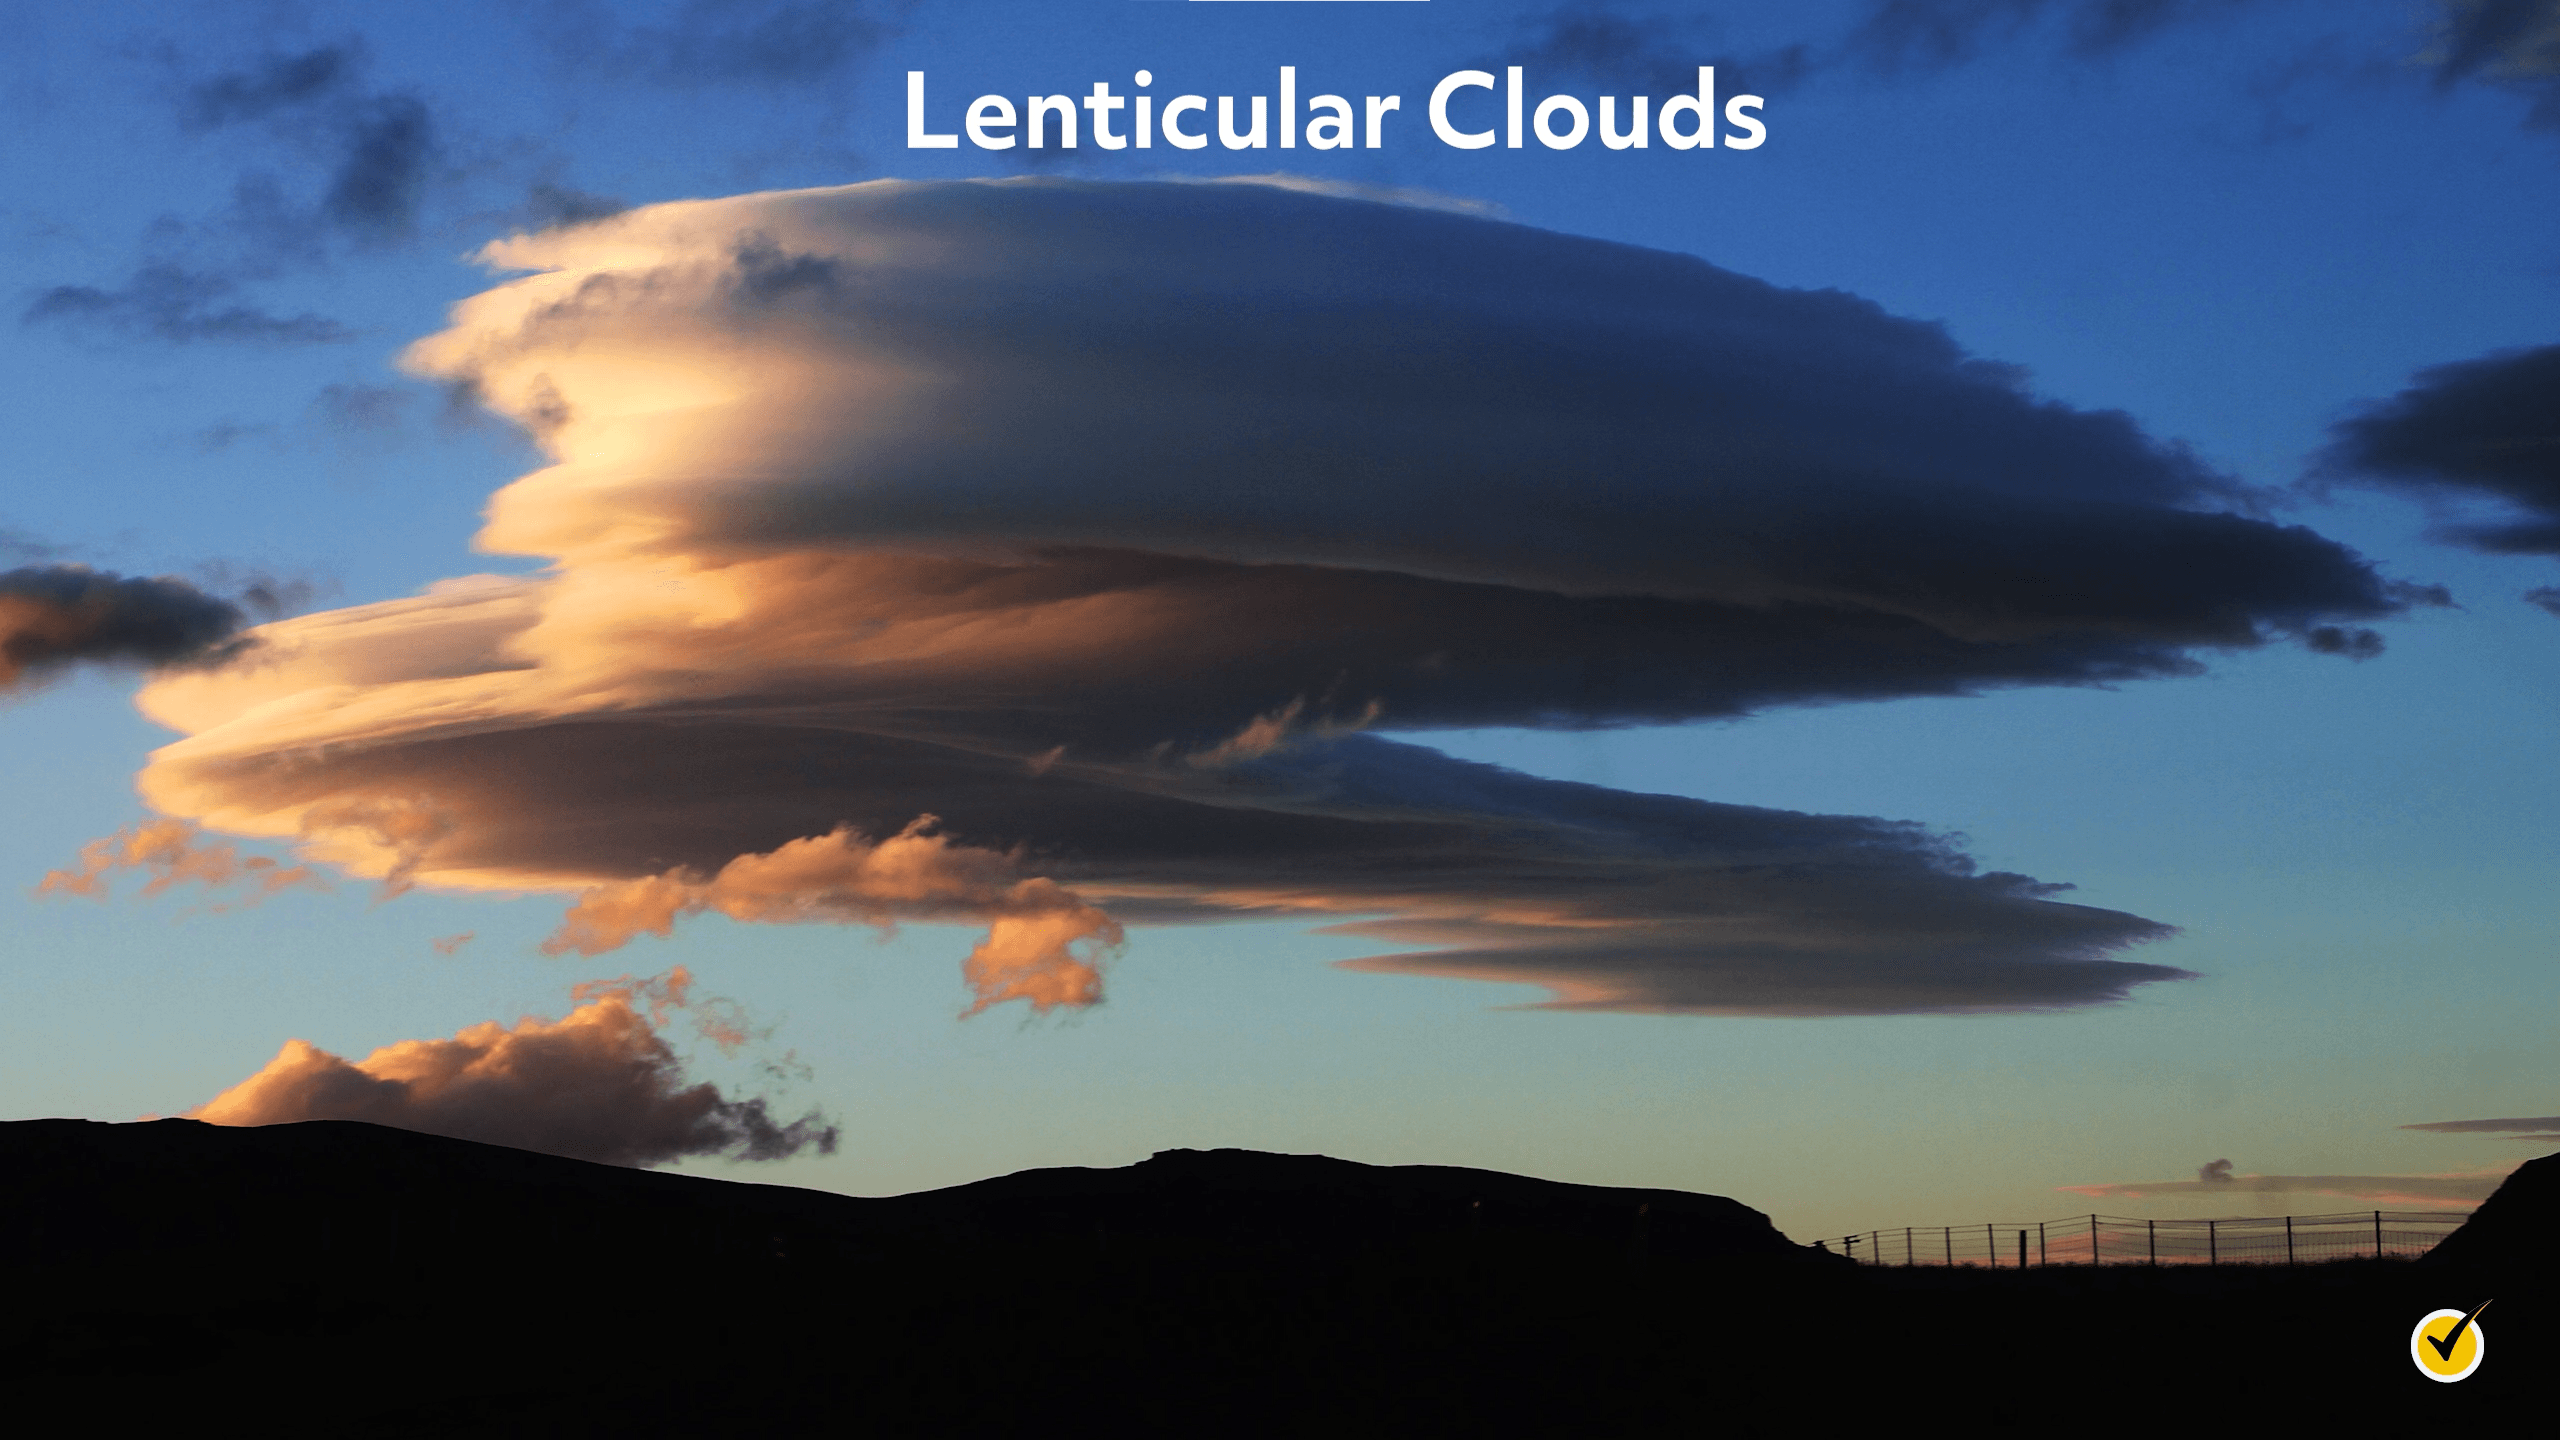 Image of Lenticular Clouds, they look a bit like flying saucers.